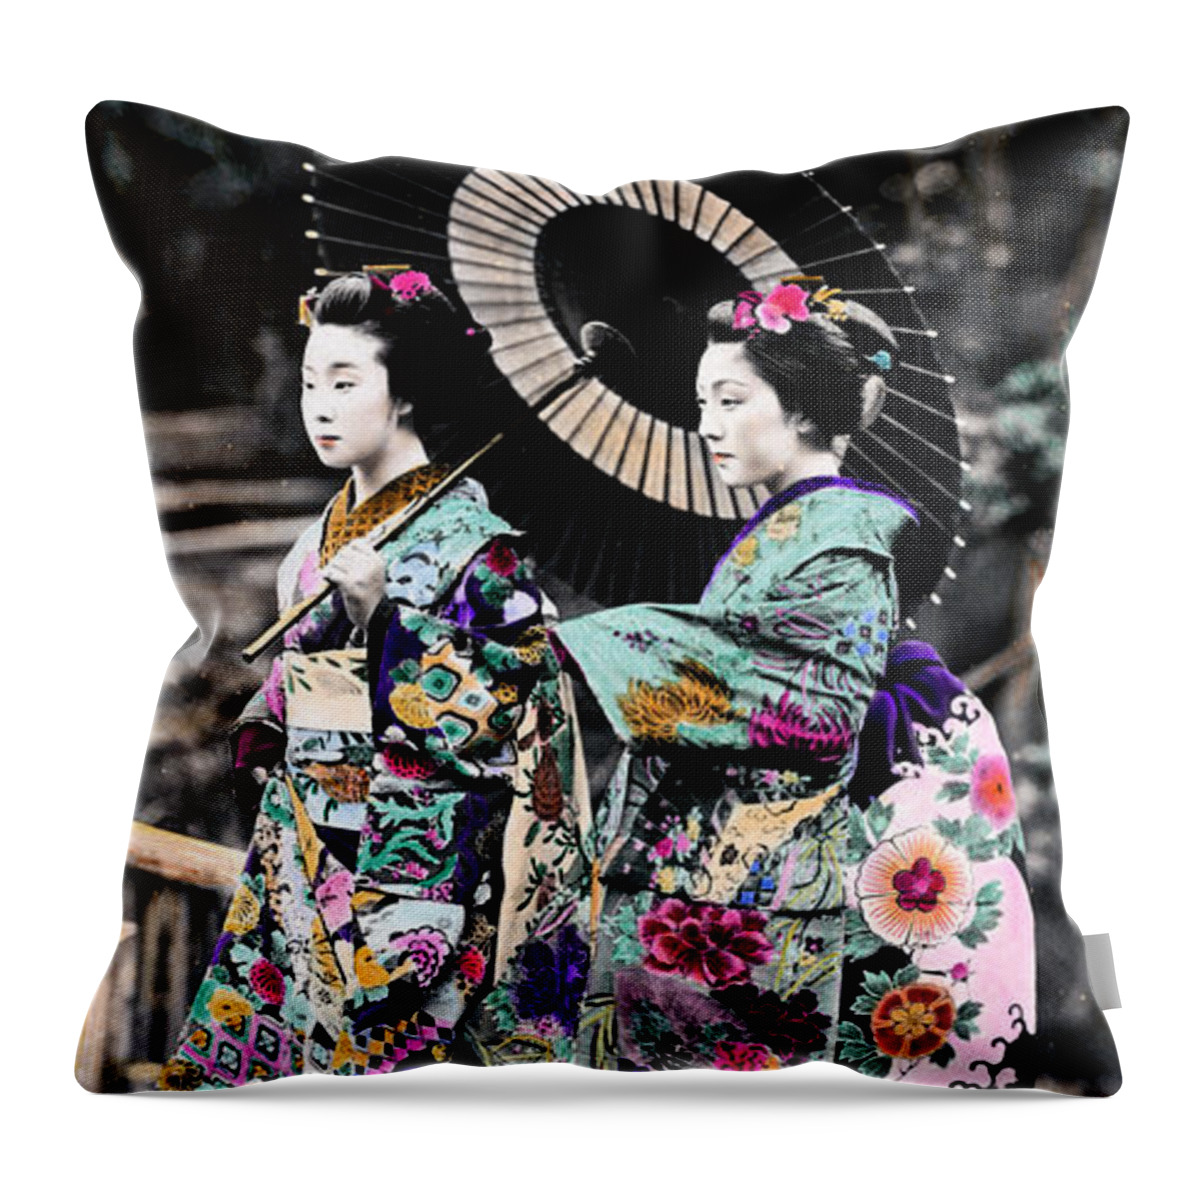 Retro Throw Pillow featuring the photograph 1870 Two Geisha Girls under Umbrella by Historic Image